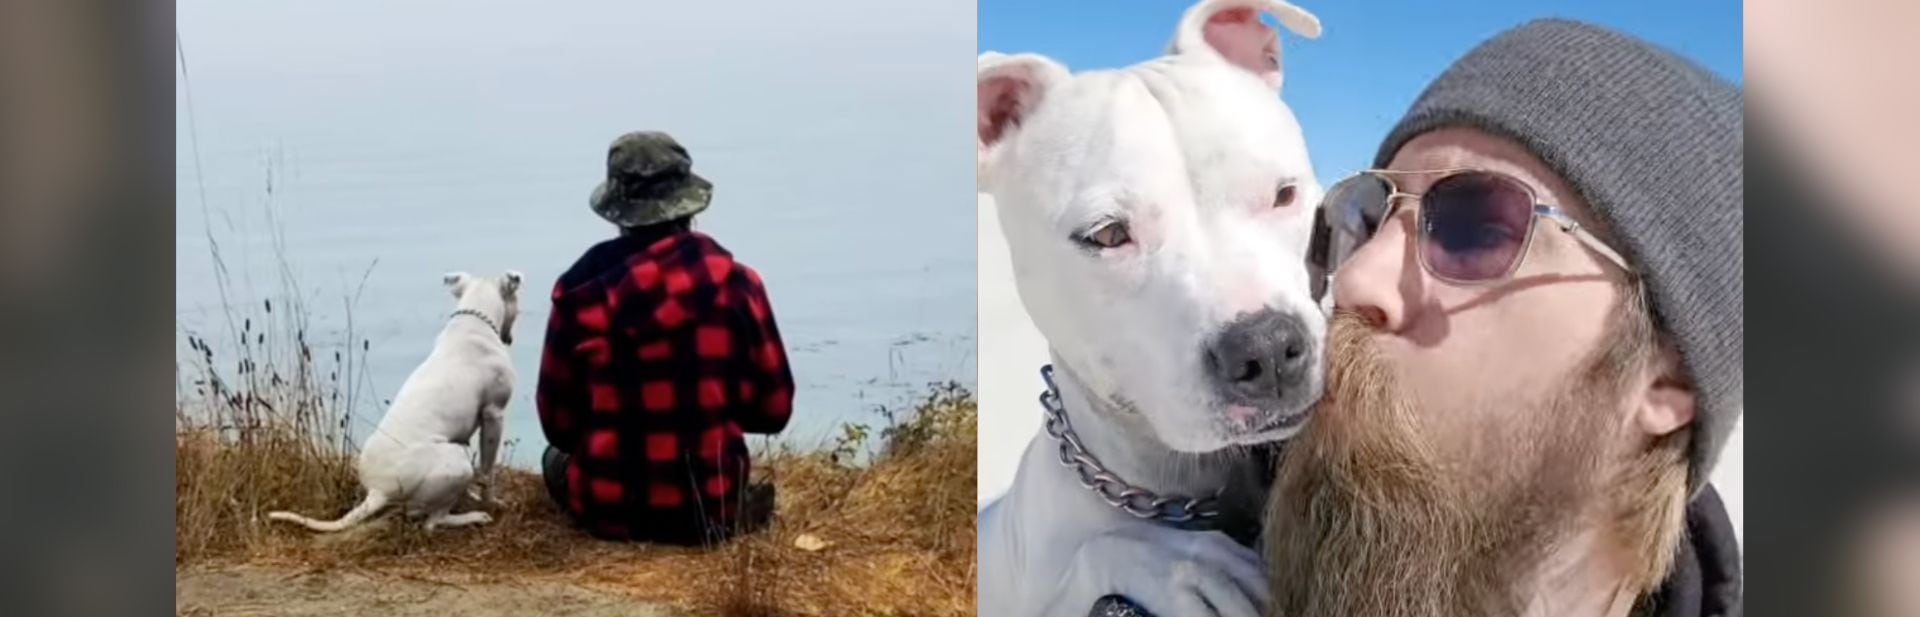 Caged and Mistreated Staffordshire Bull Terrier Finds Purpose as Veteran’s Best Friend